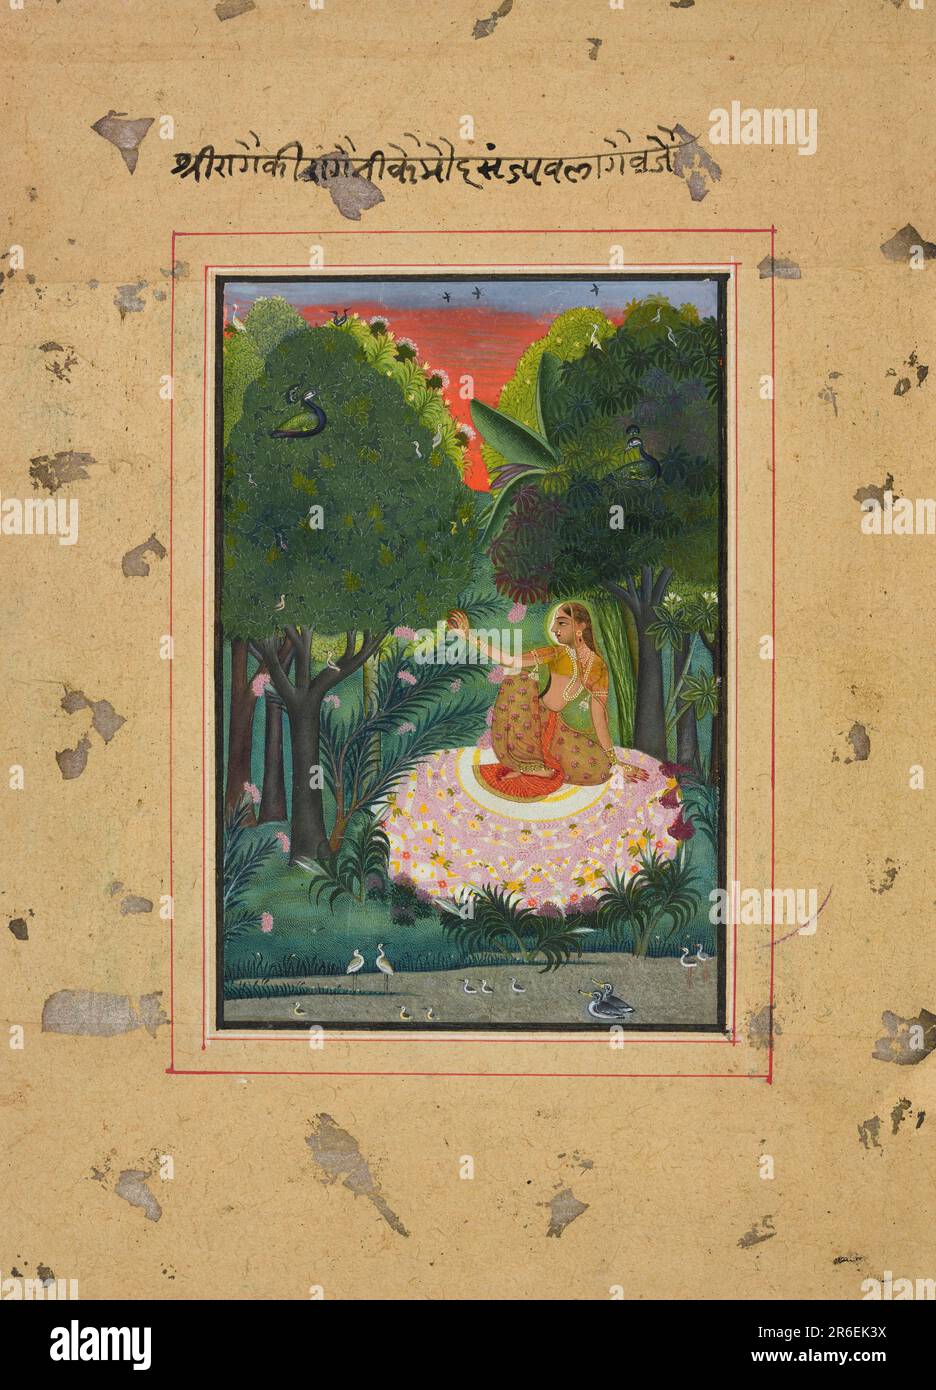 Kamod Ragini, folio from a Ragamala. Opaque watercolor and gold on paper. Origin: Kota, Rajasthan state, India. Date: ca. 1770-1775. Museum: Freer Gallery of Art and Arthur M. Sackler Gallery. Stock Photo